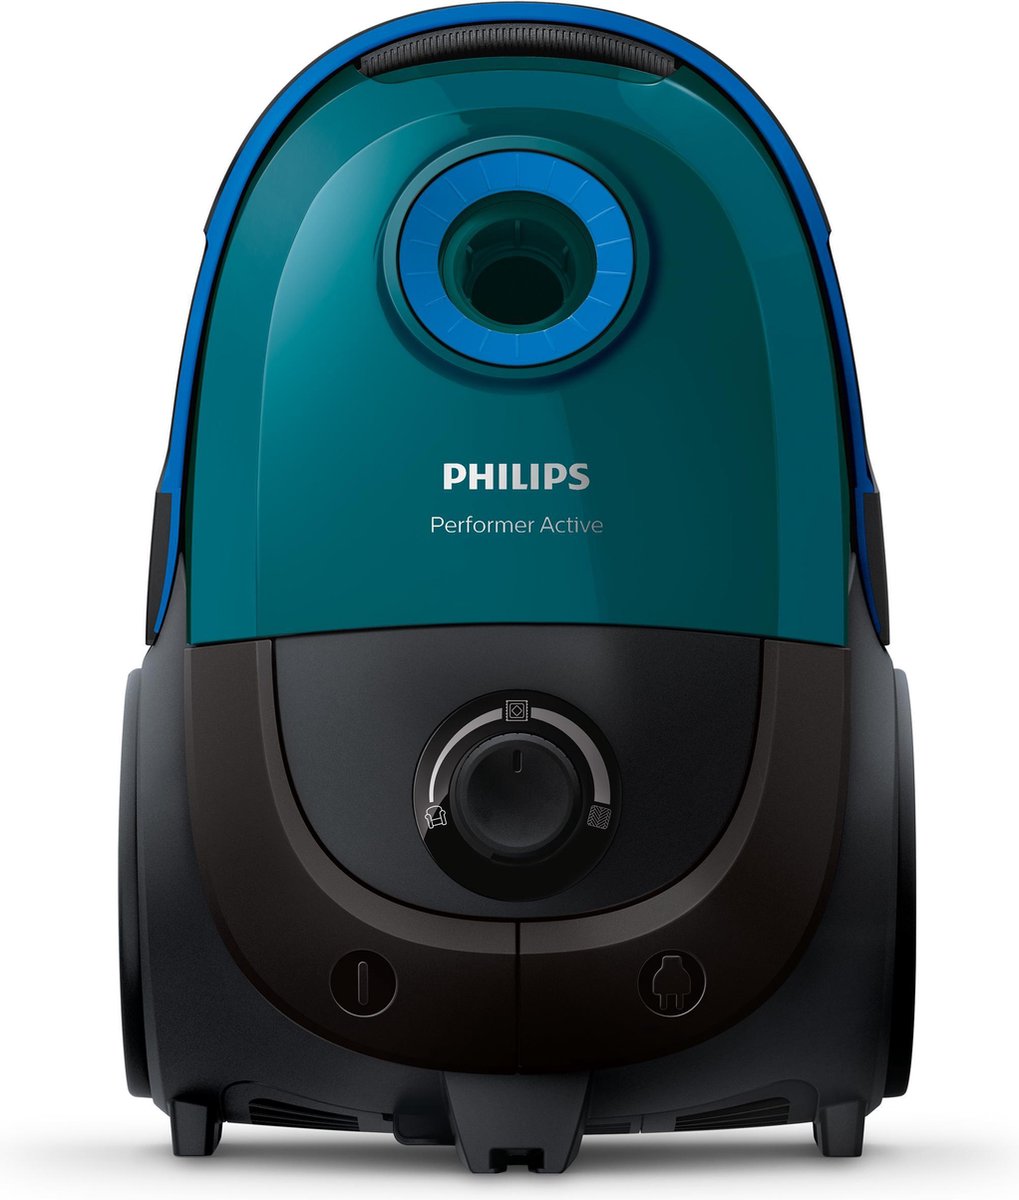 Philips Performer Active FC8580/09